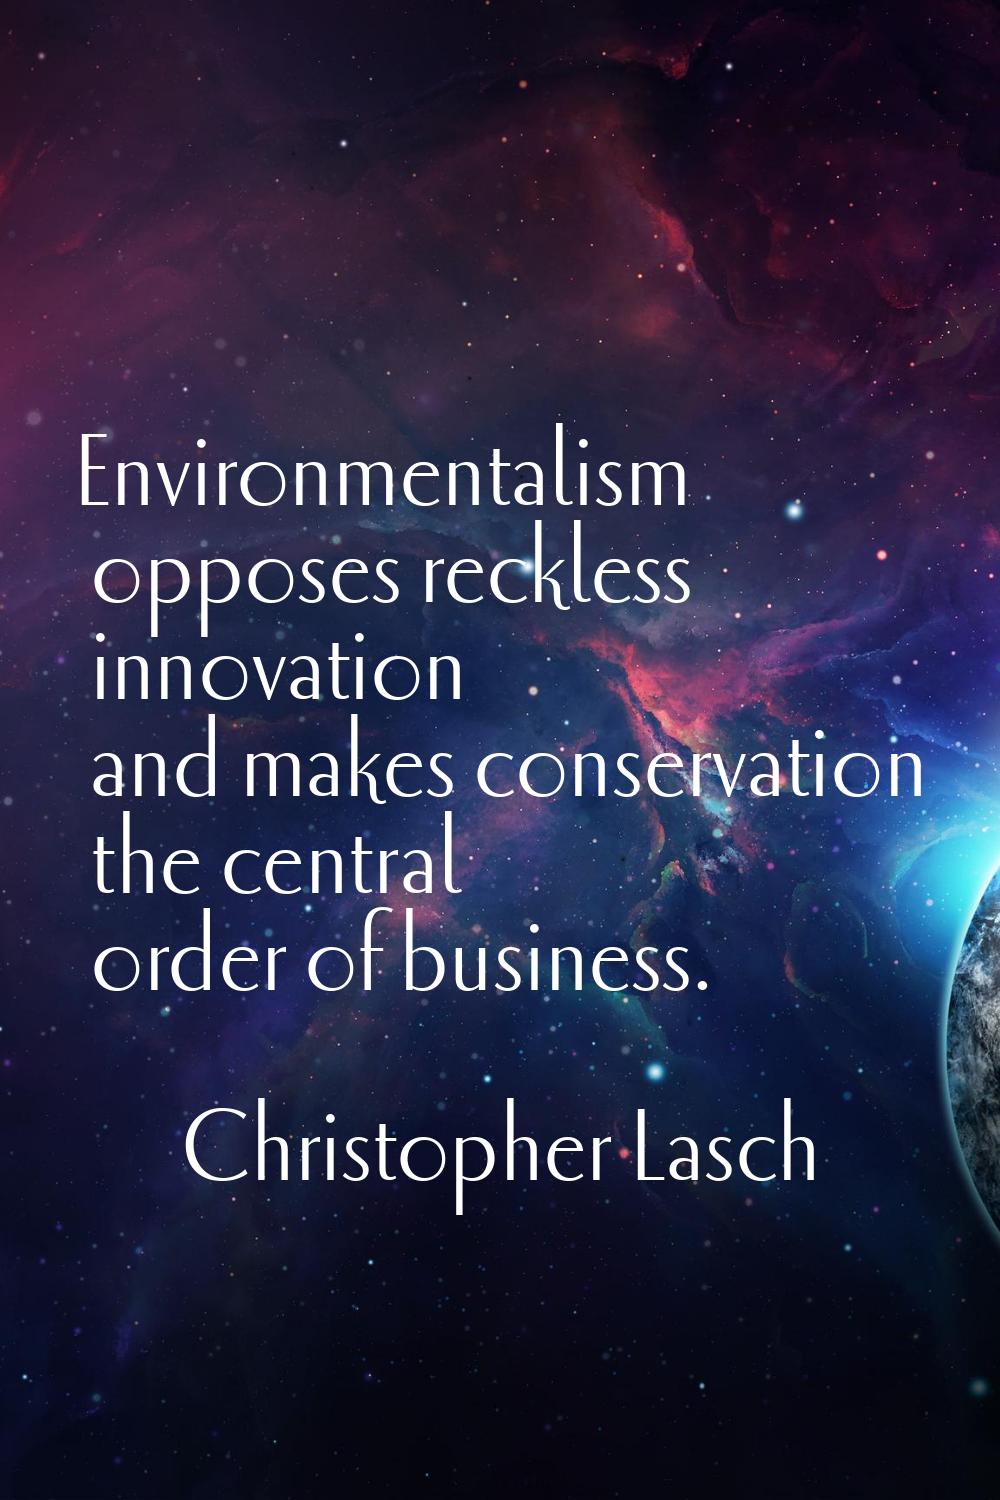 Environmentalism opposes reckless innovation and makes conservation the central order of business.